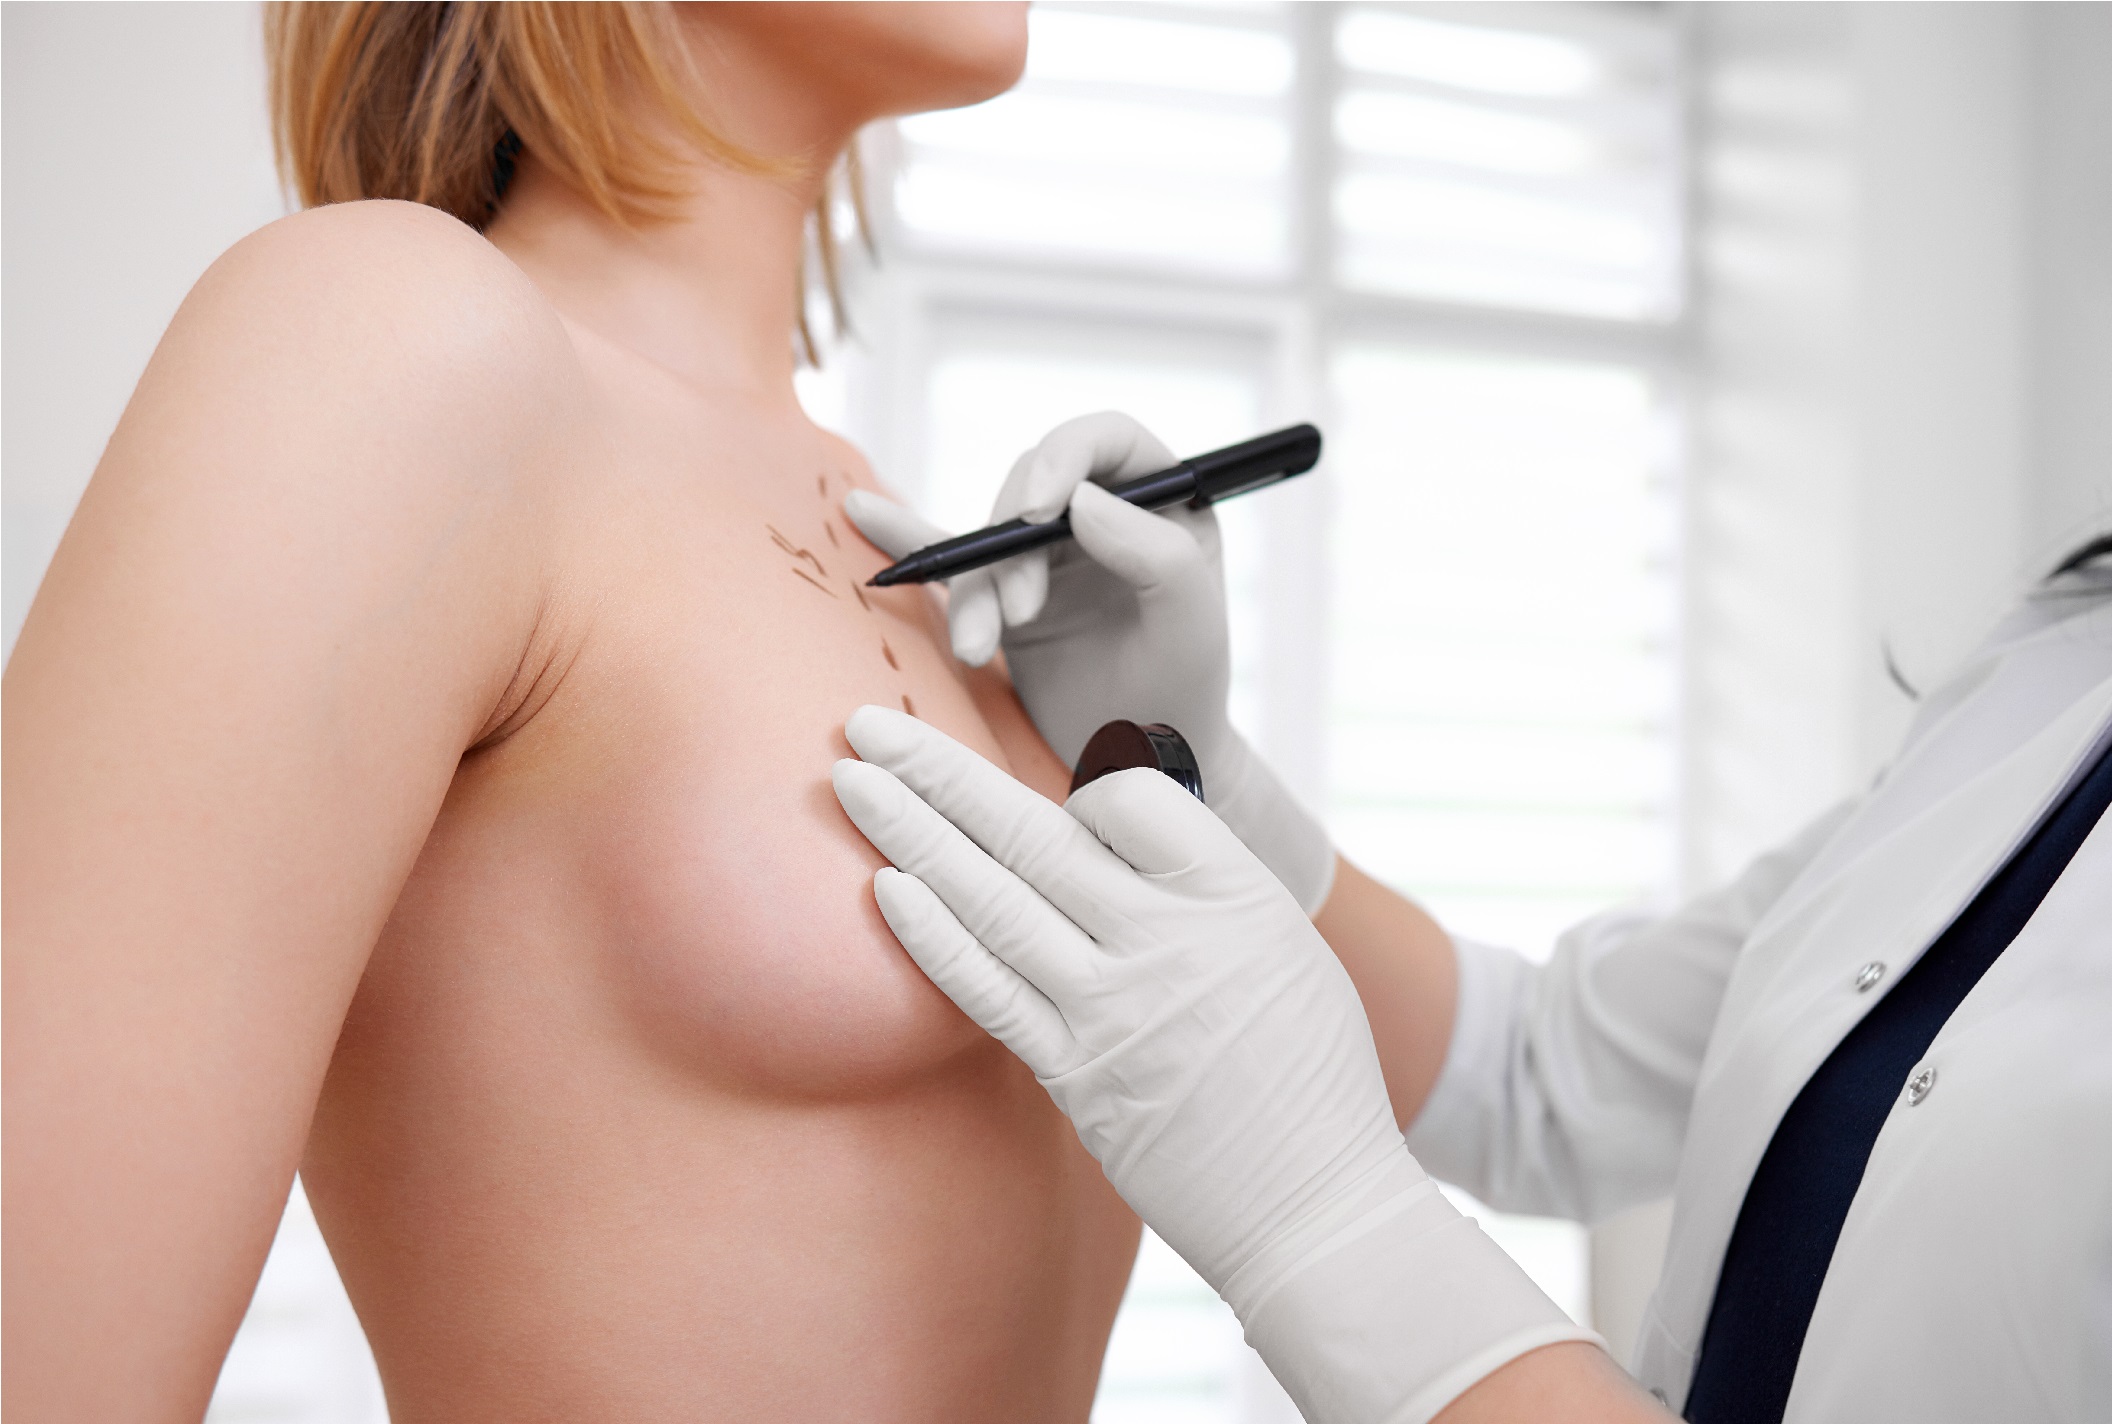 a young woman visiting a doctor preparing for breast augmentation surgery